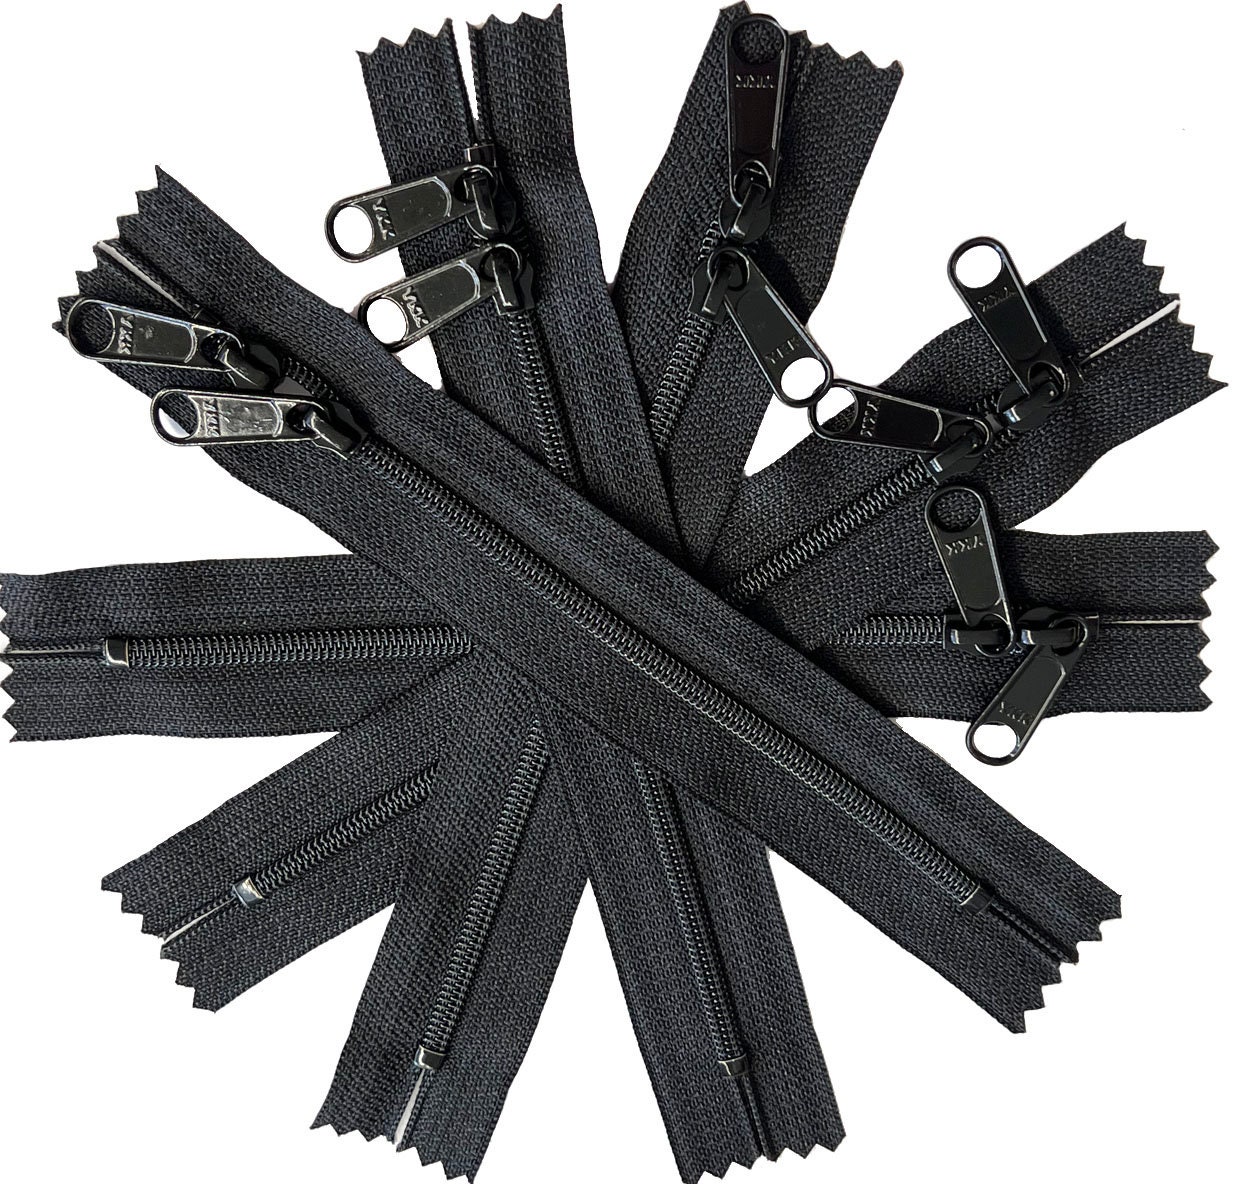 Double Slide YKK Zippers - #4.5 Coil with Closed Bottom Two Head to Head  Long Zipper Pulls. - Color Black - Choose Length - Made in The United  States